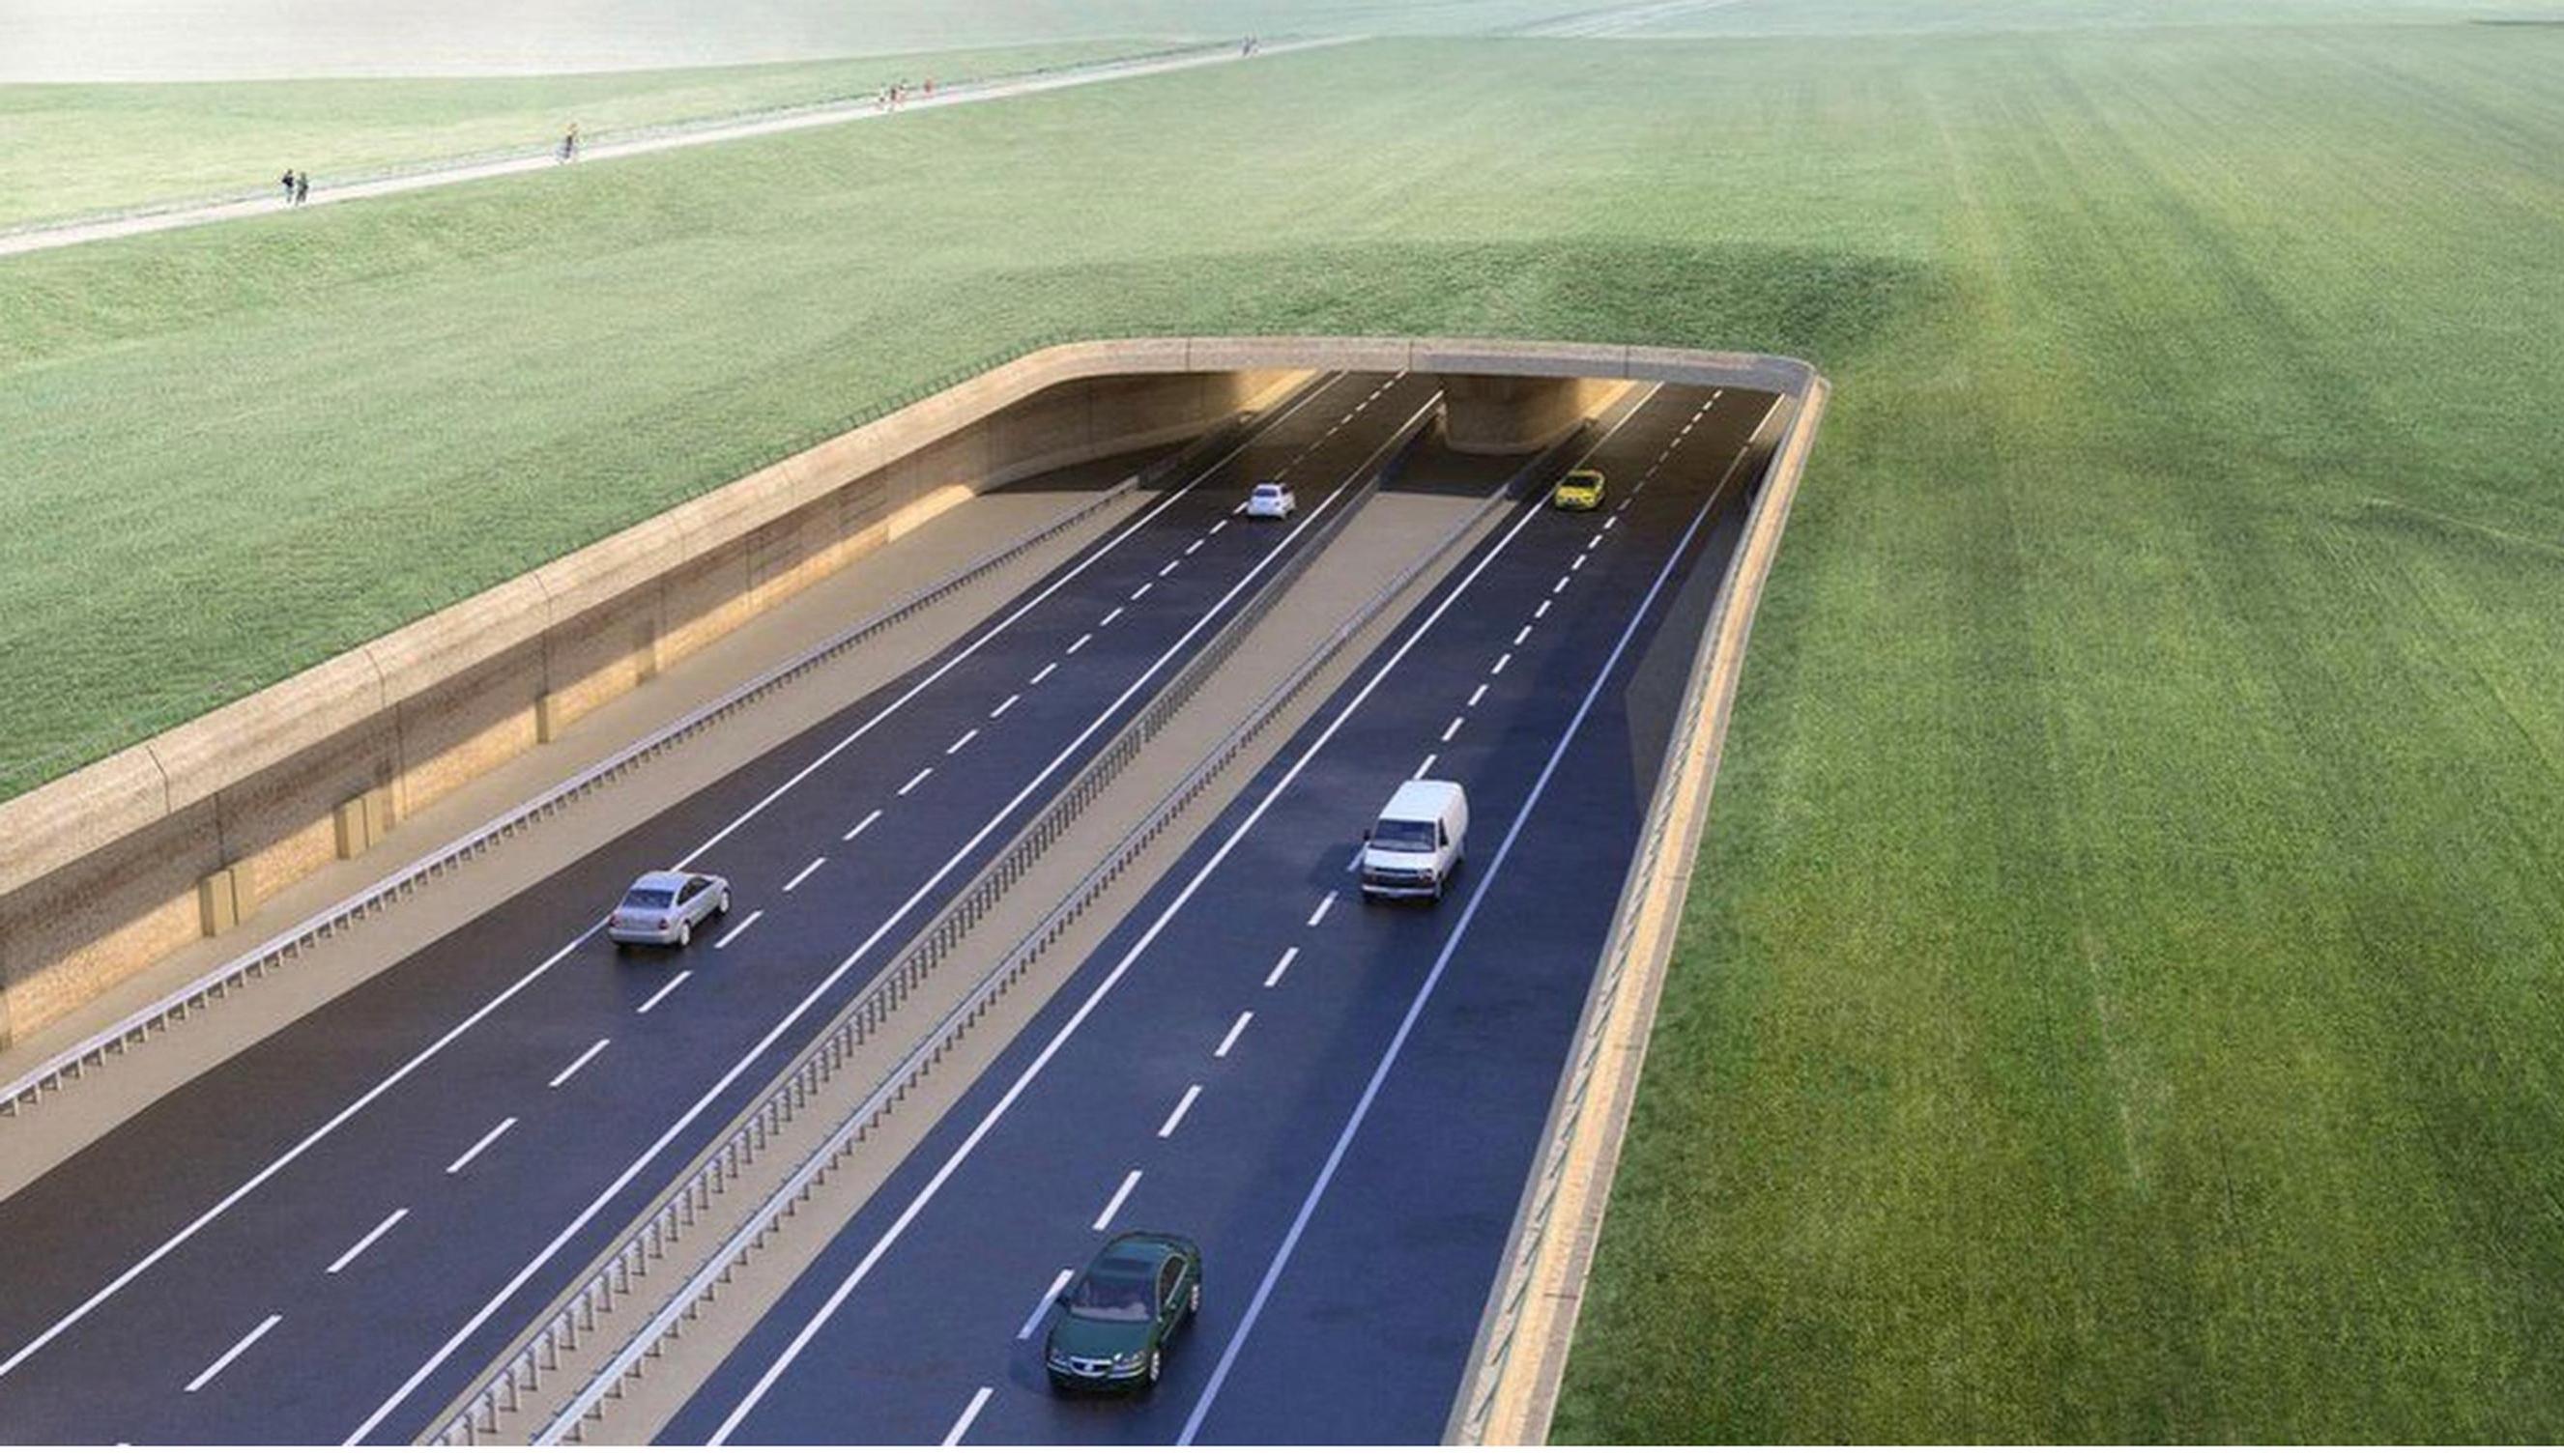 Transport Action Network is urging Government to scrap Stonehenge scheme